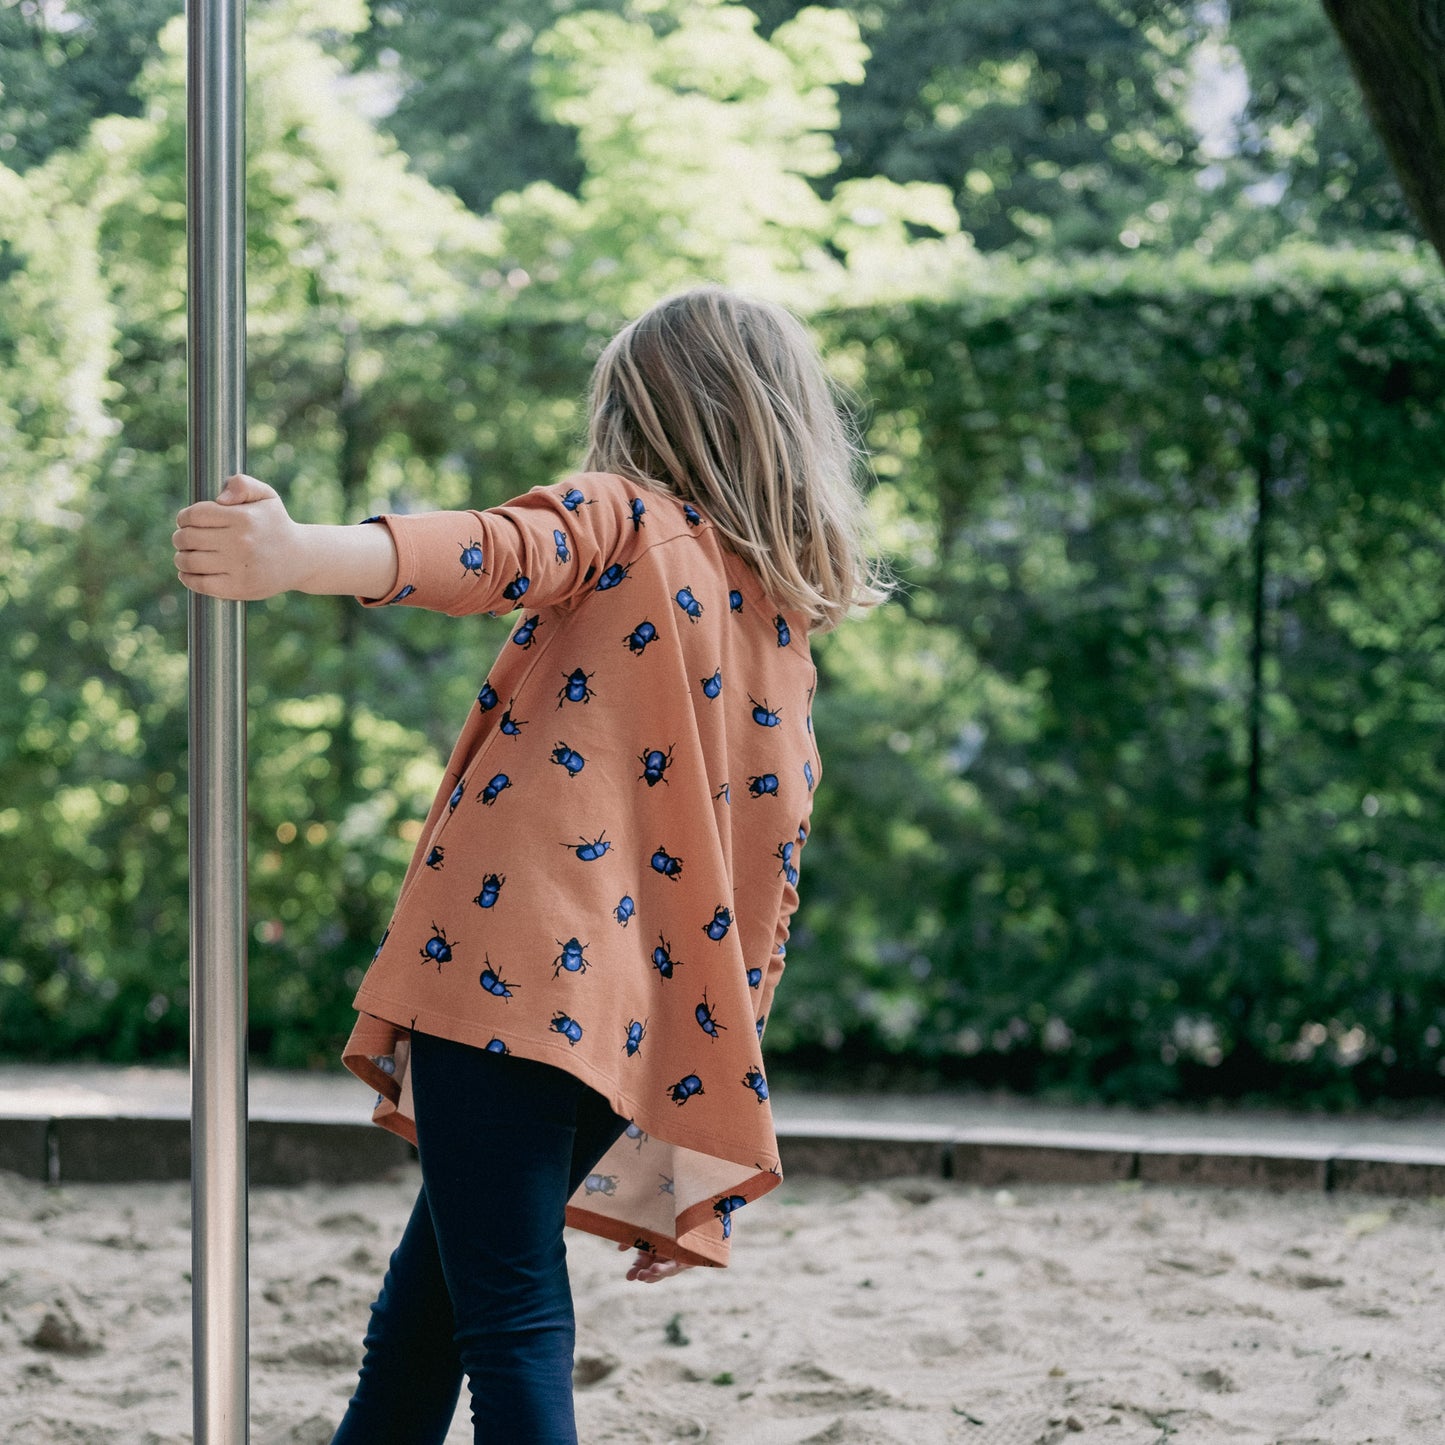 Girl in a playground with a orange tunic dress with blue beetles on.